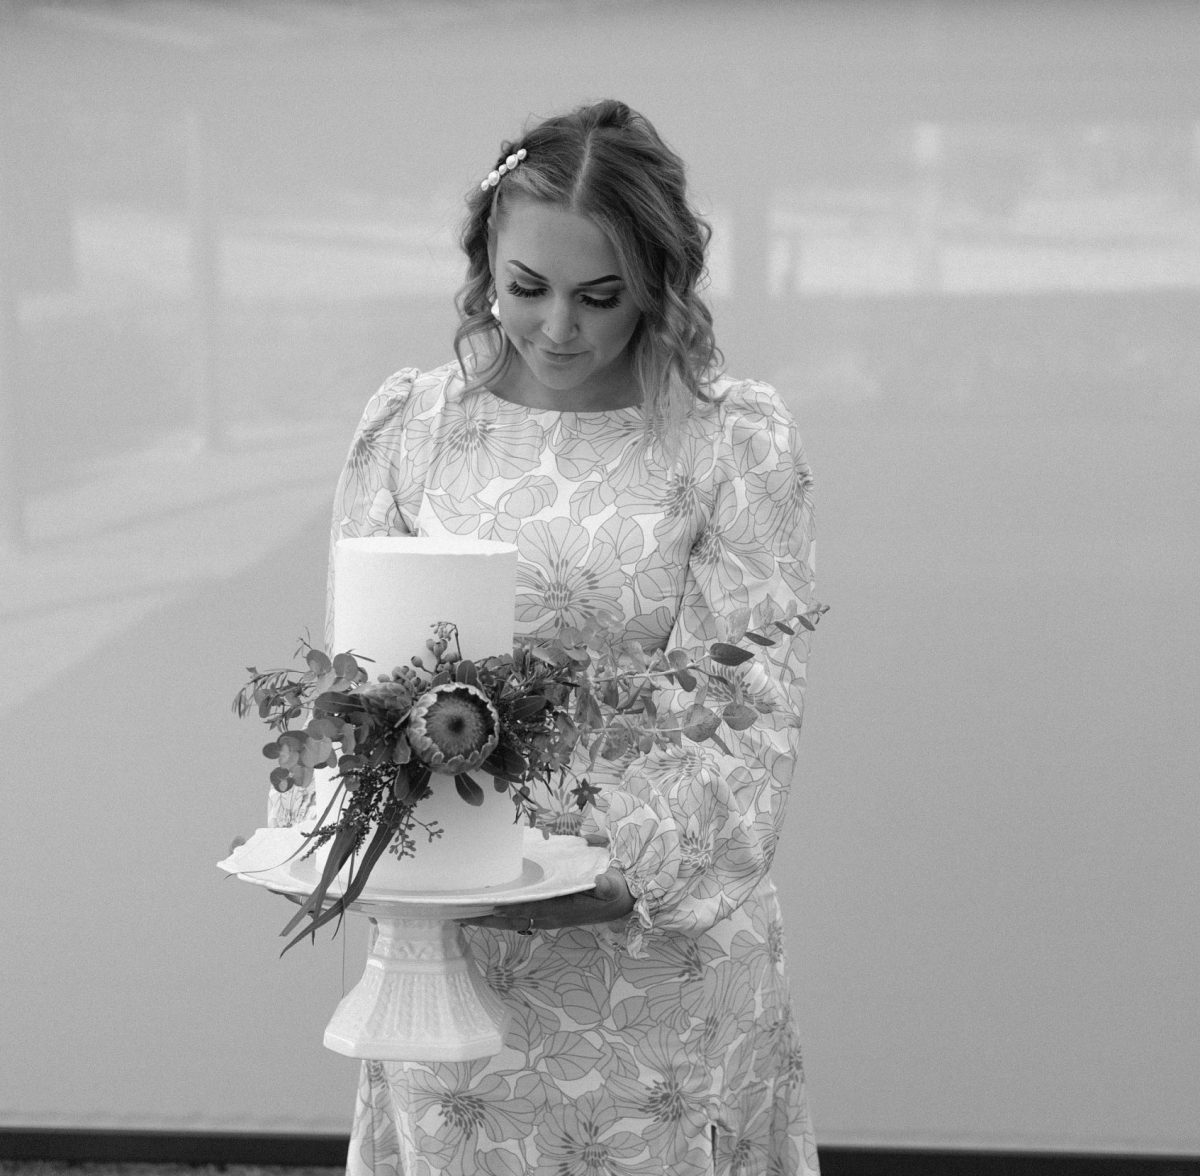 A black-and-white photo of a woman holding a cake and looking down